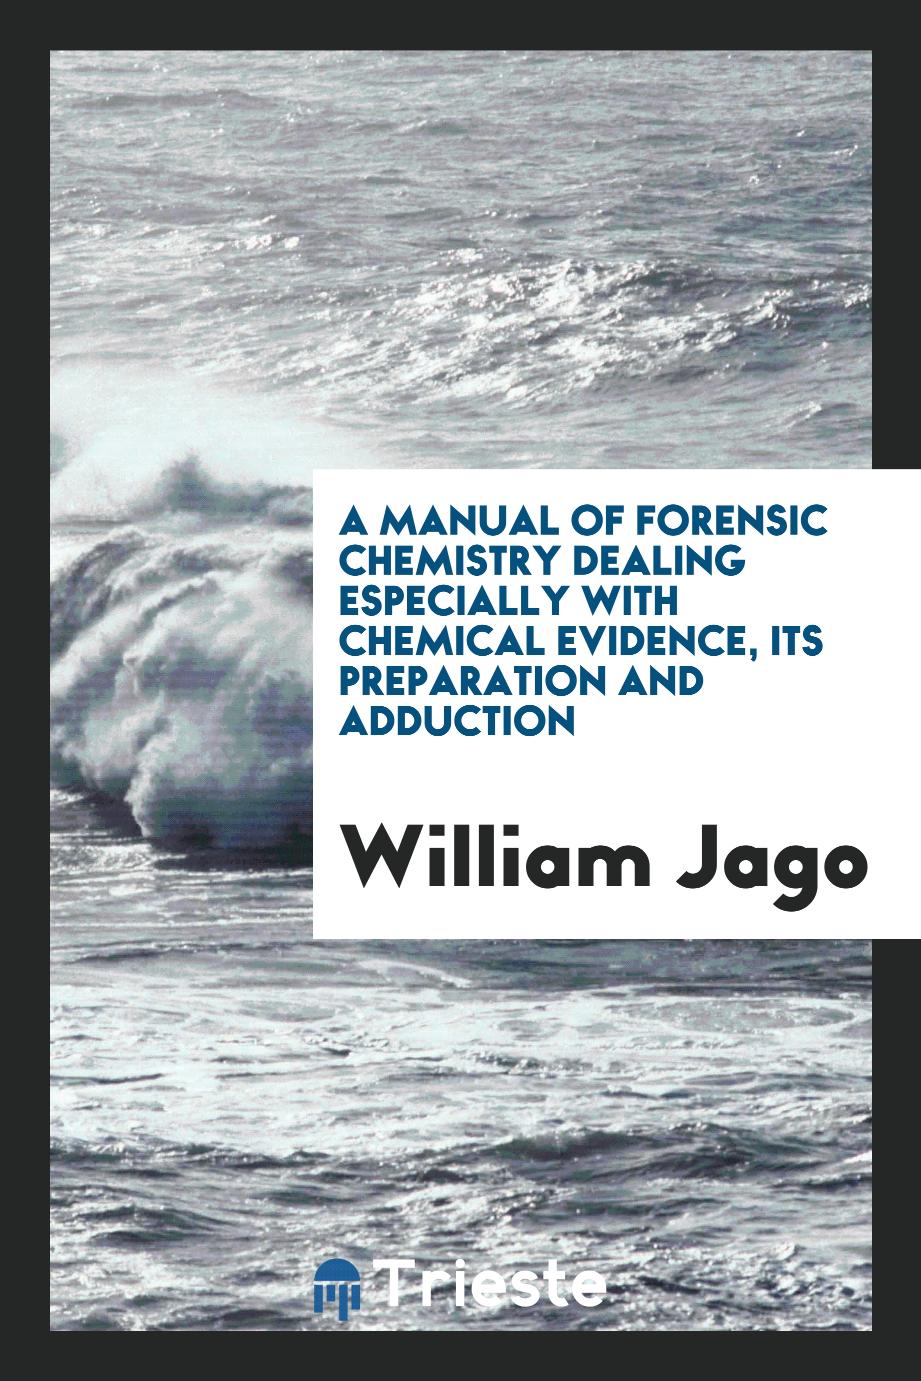 A manual of forensic chemistry dealing especially with chemical evidence, its preparation and adduction